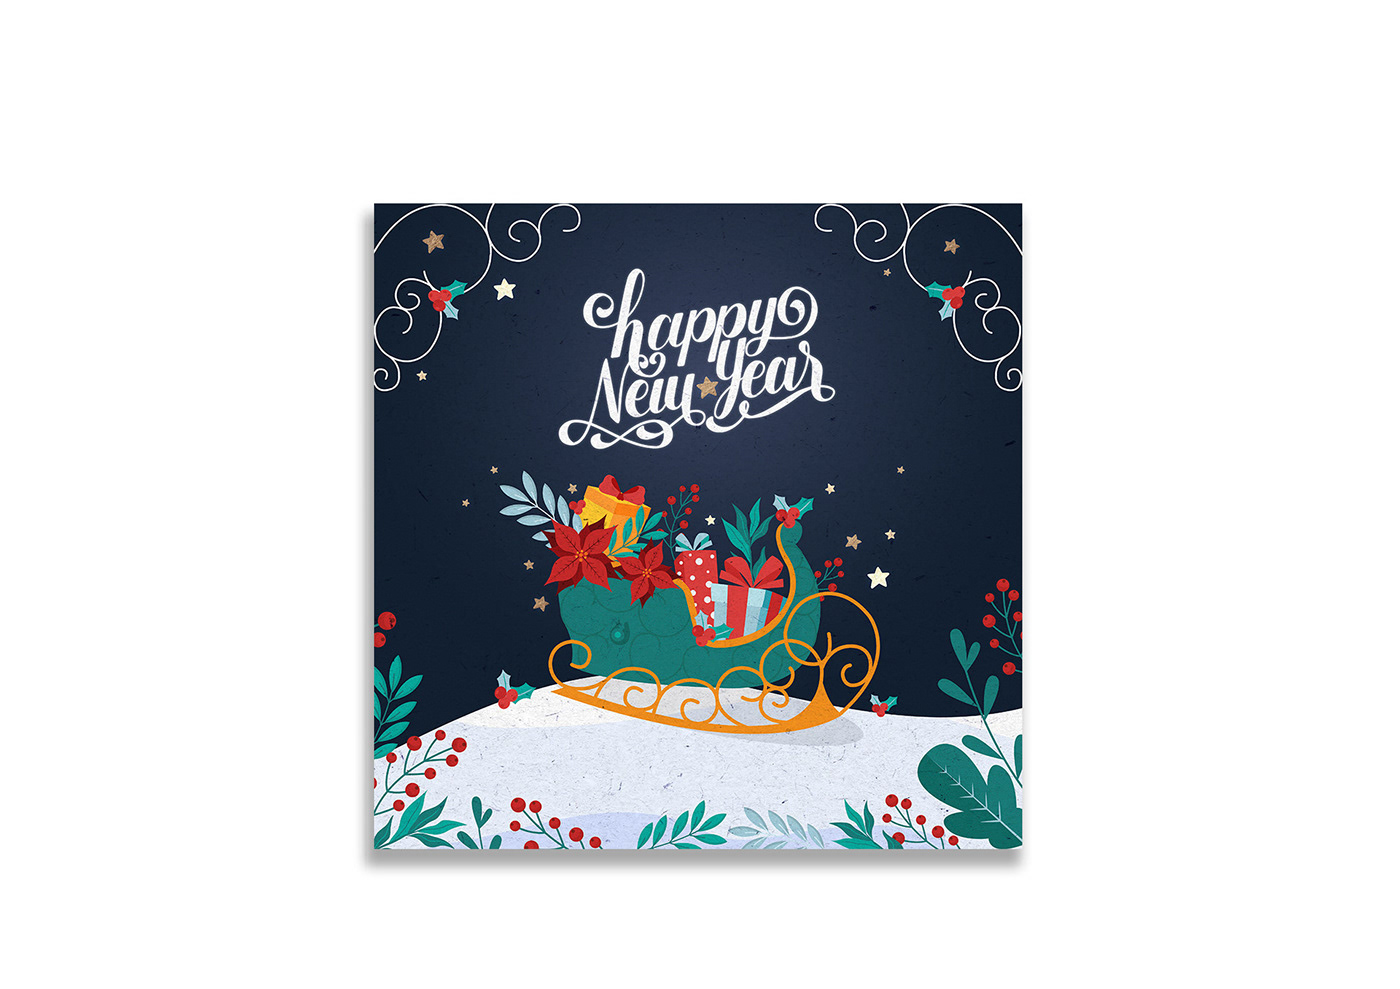 graphicdesign ArabGraphicDesign feasts occasions greeting cards Corporate Identity Self-branding modern